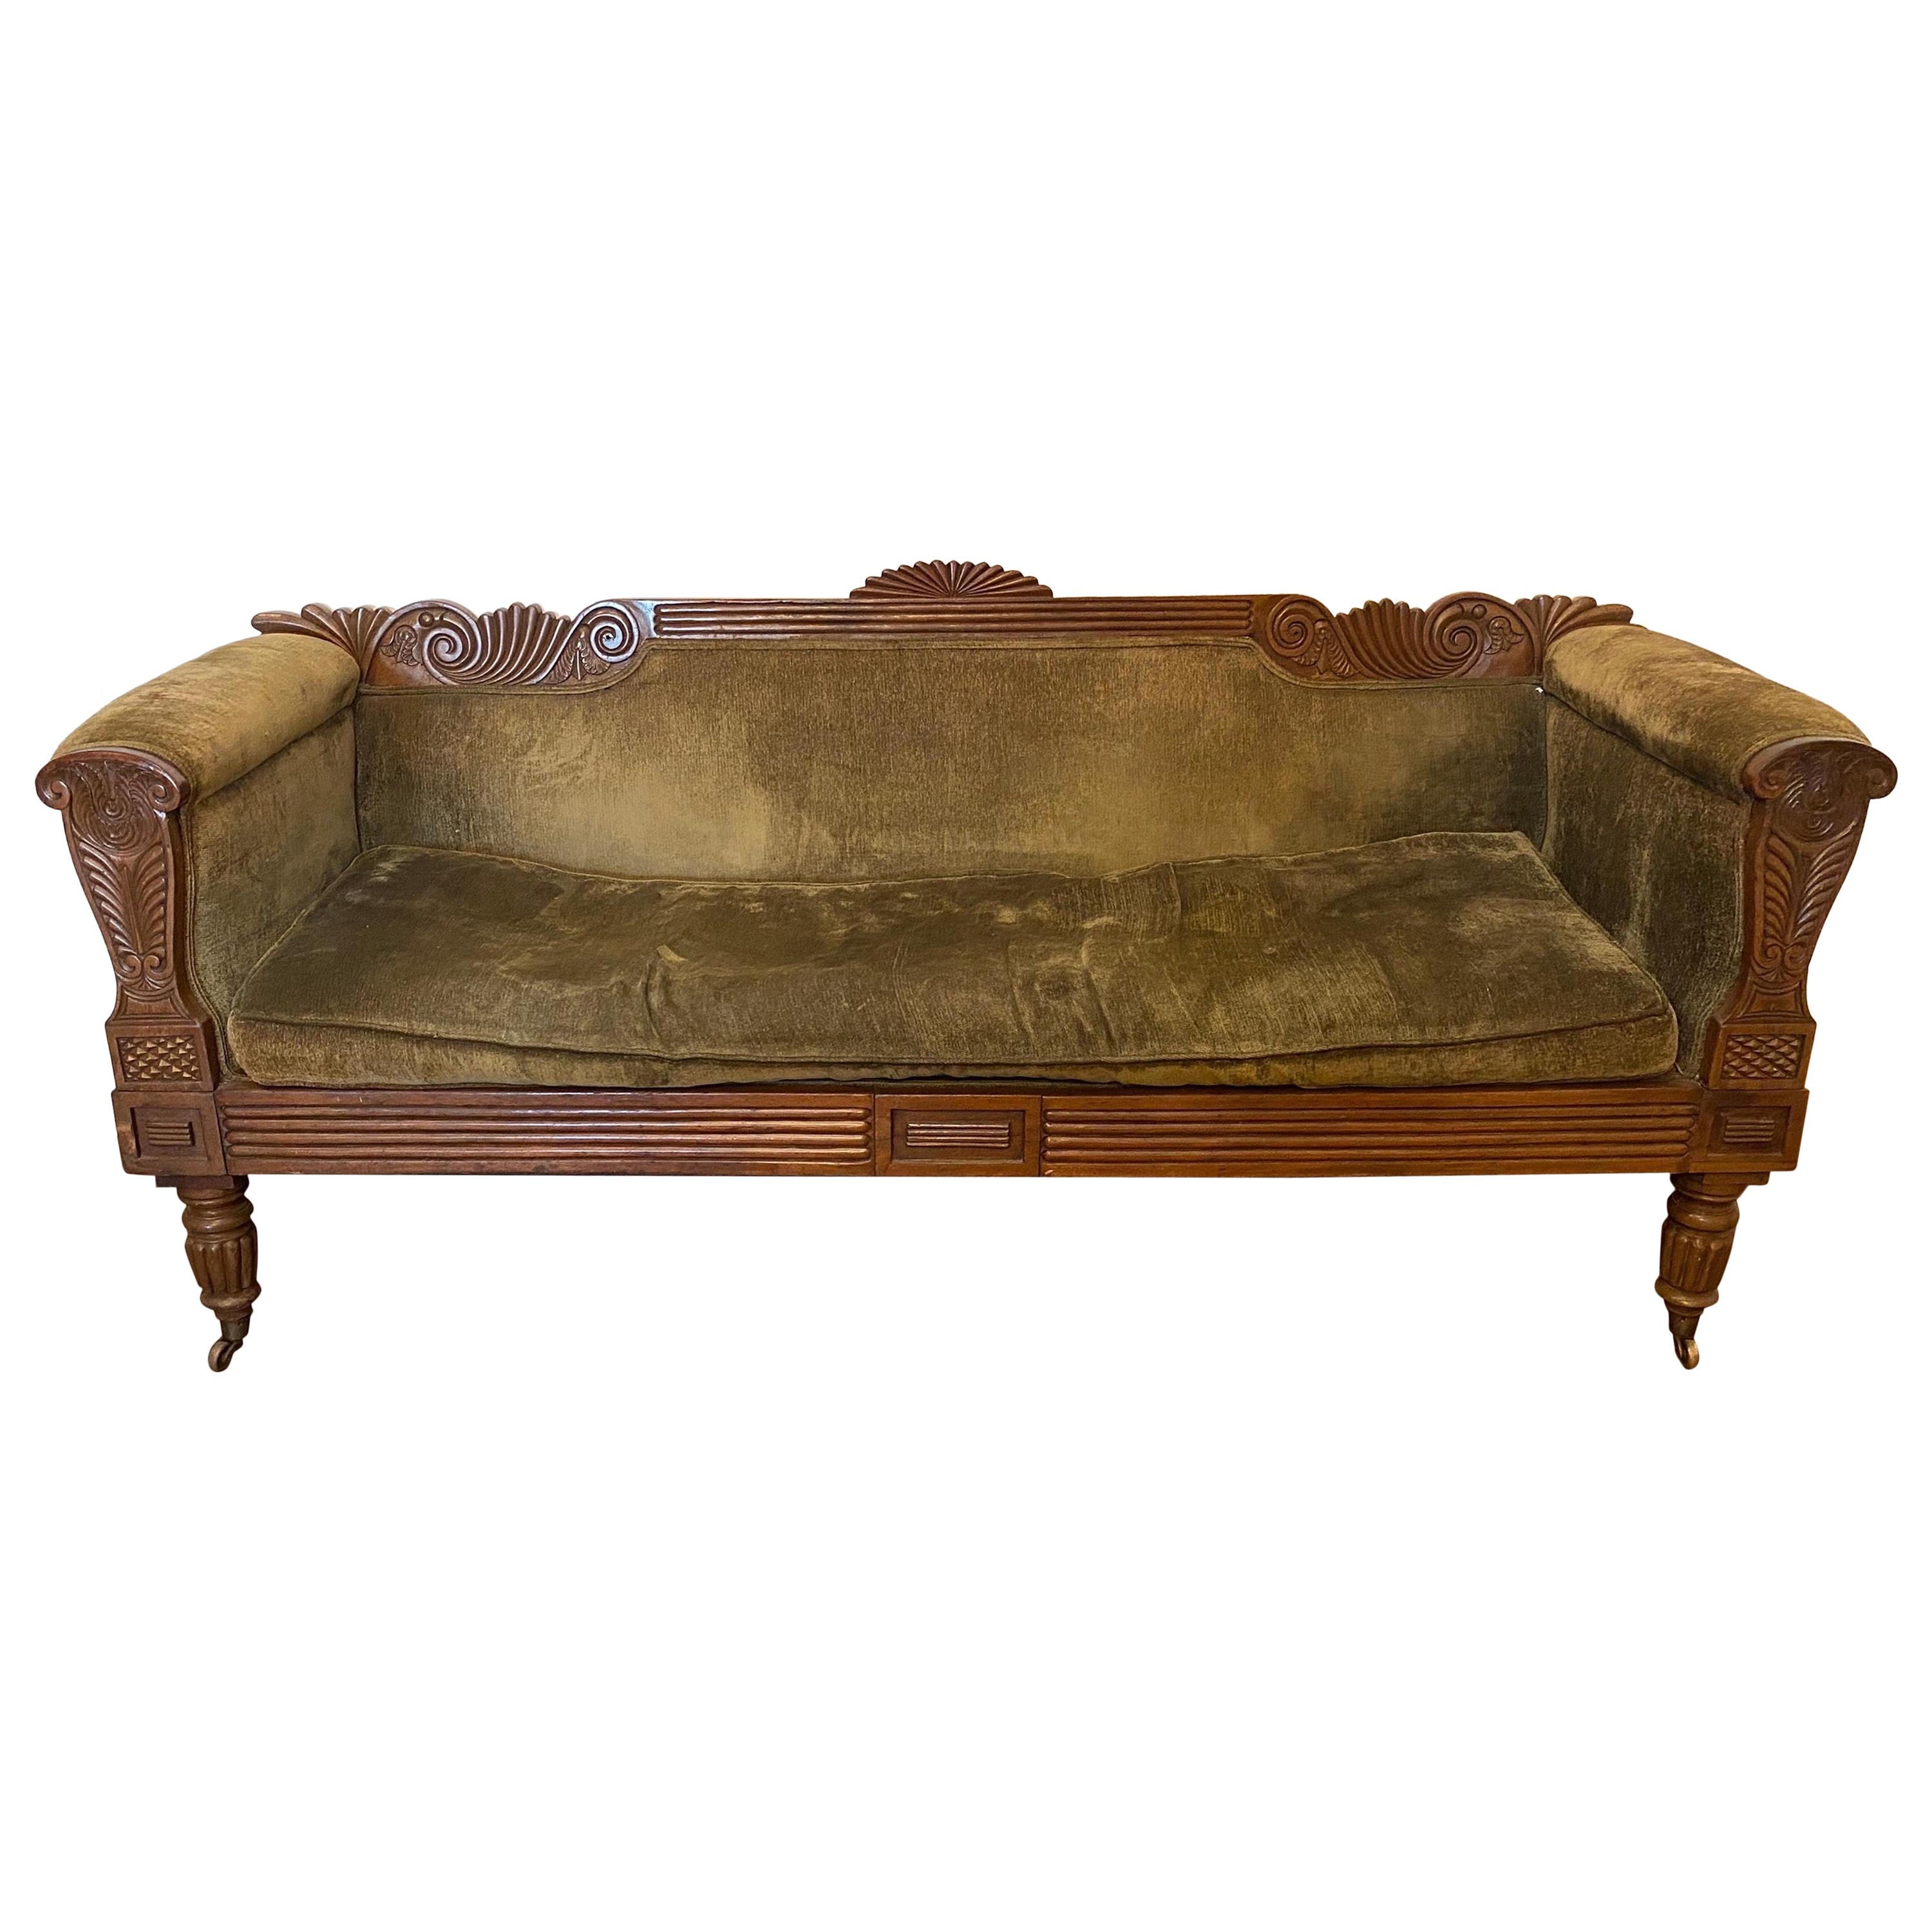 19th century carved English regency sofa with green velvet upholstery and original castors.